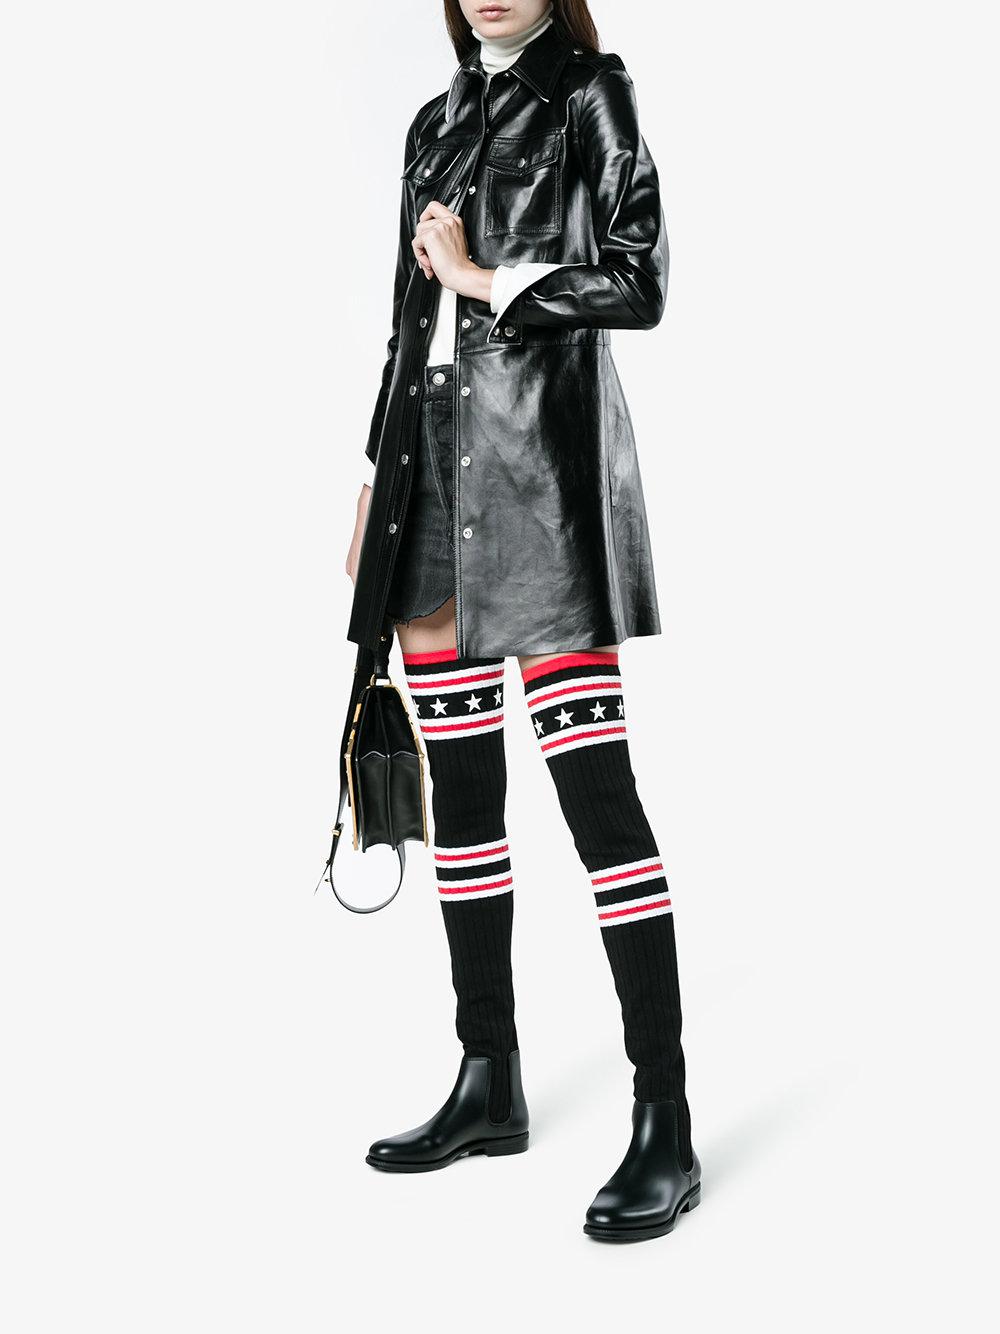 givenchy storm over the knee boots